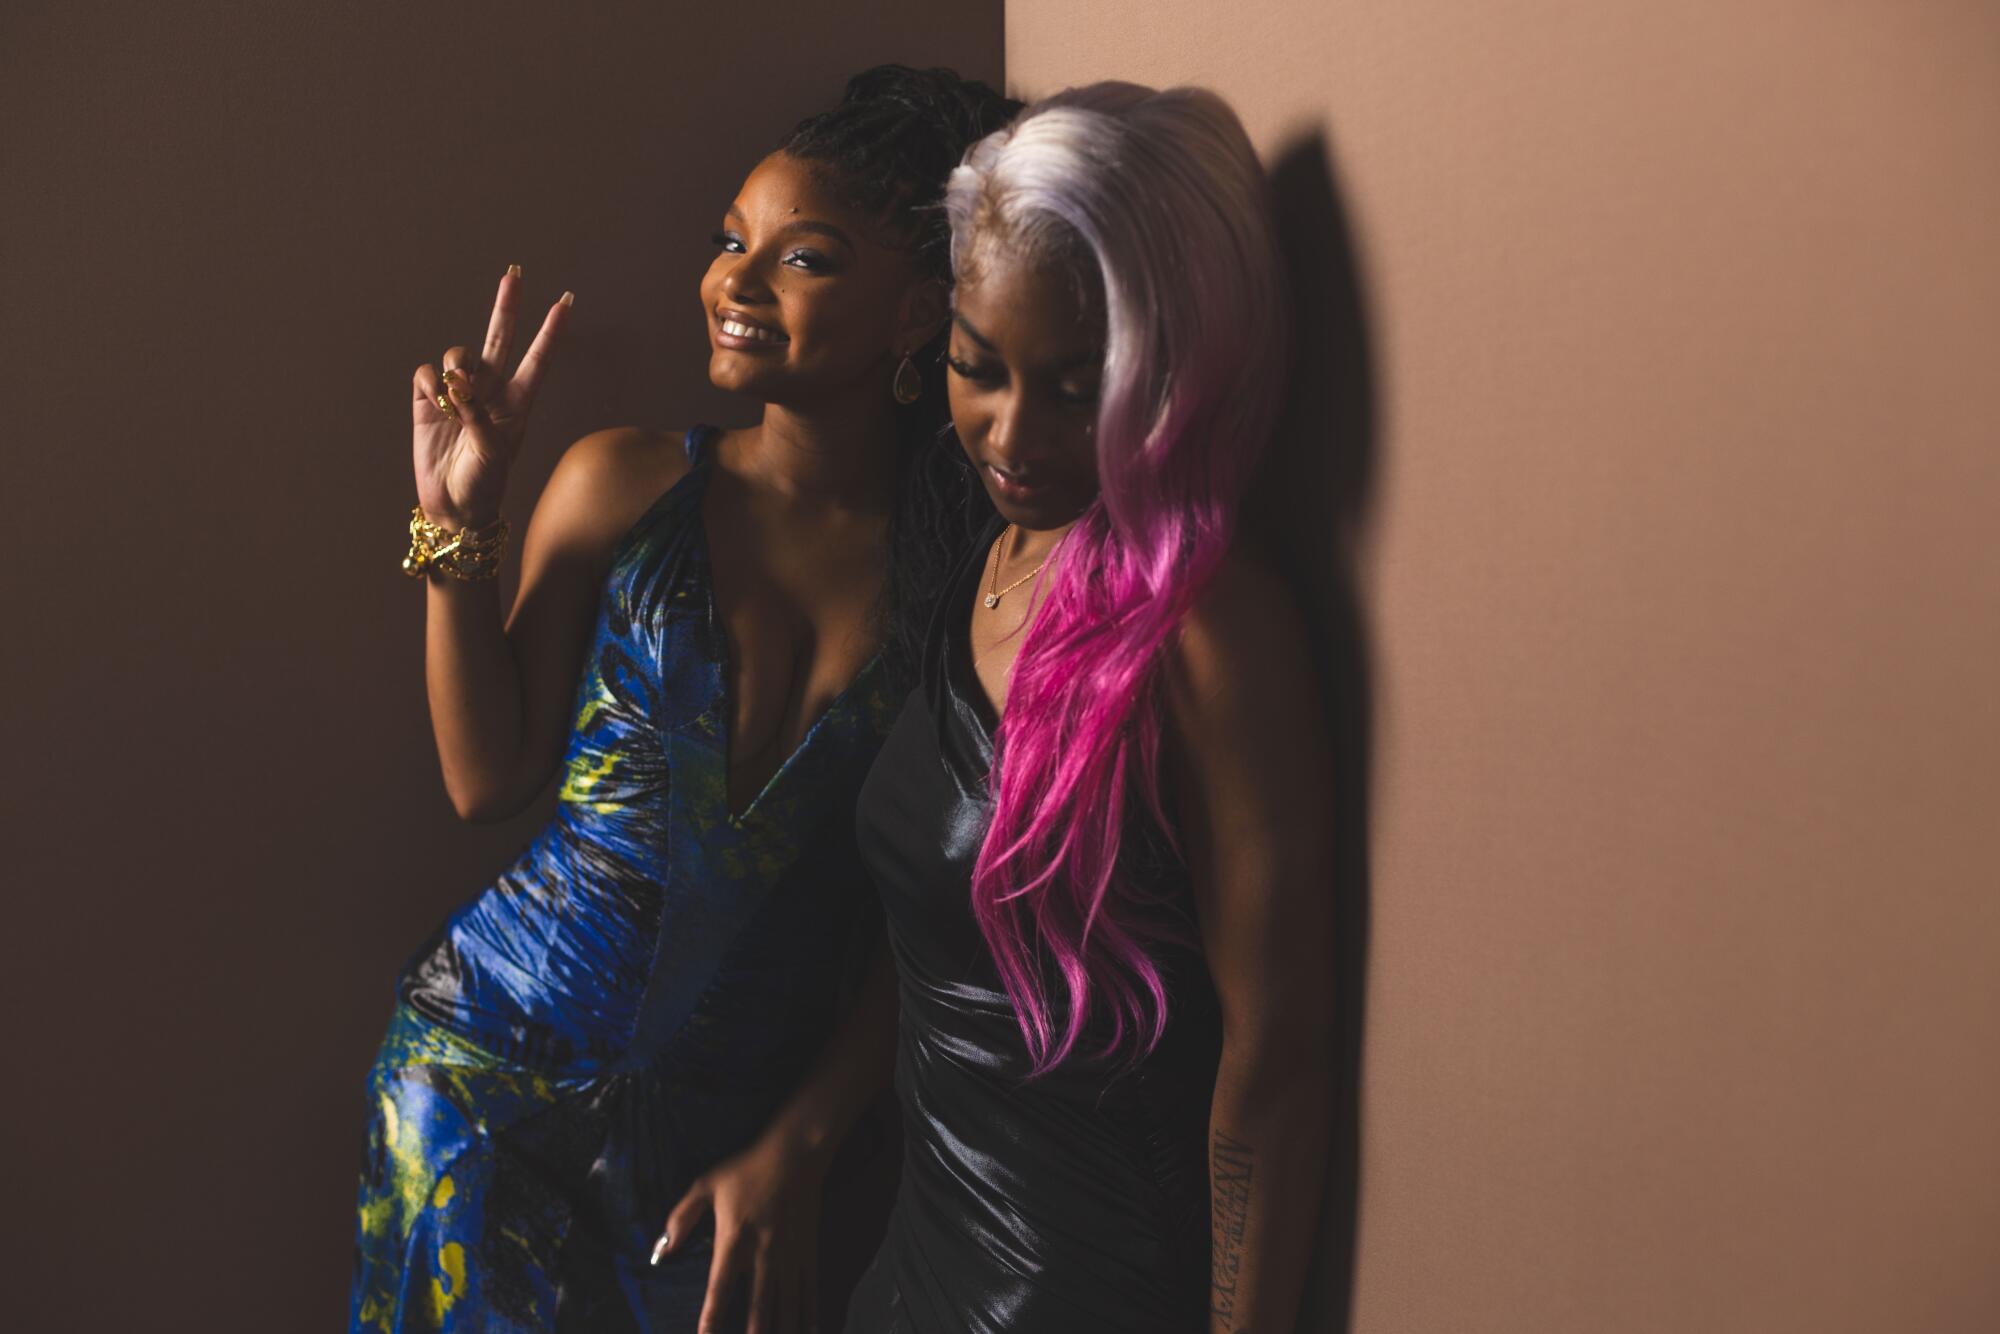 Halle Bailey, in a blue dress, stands next to Tiarra Granberry whose hair shades from silver to pink.